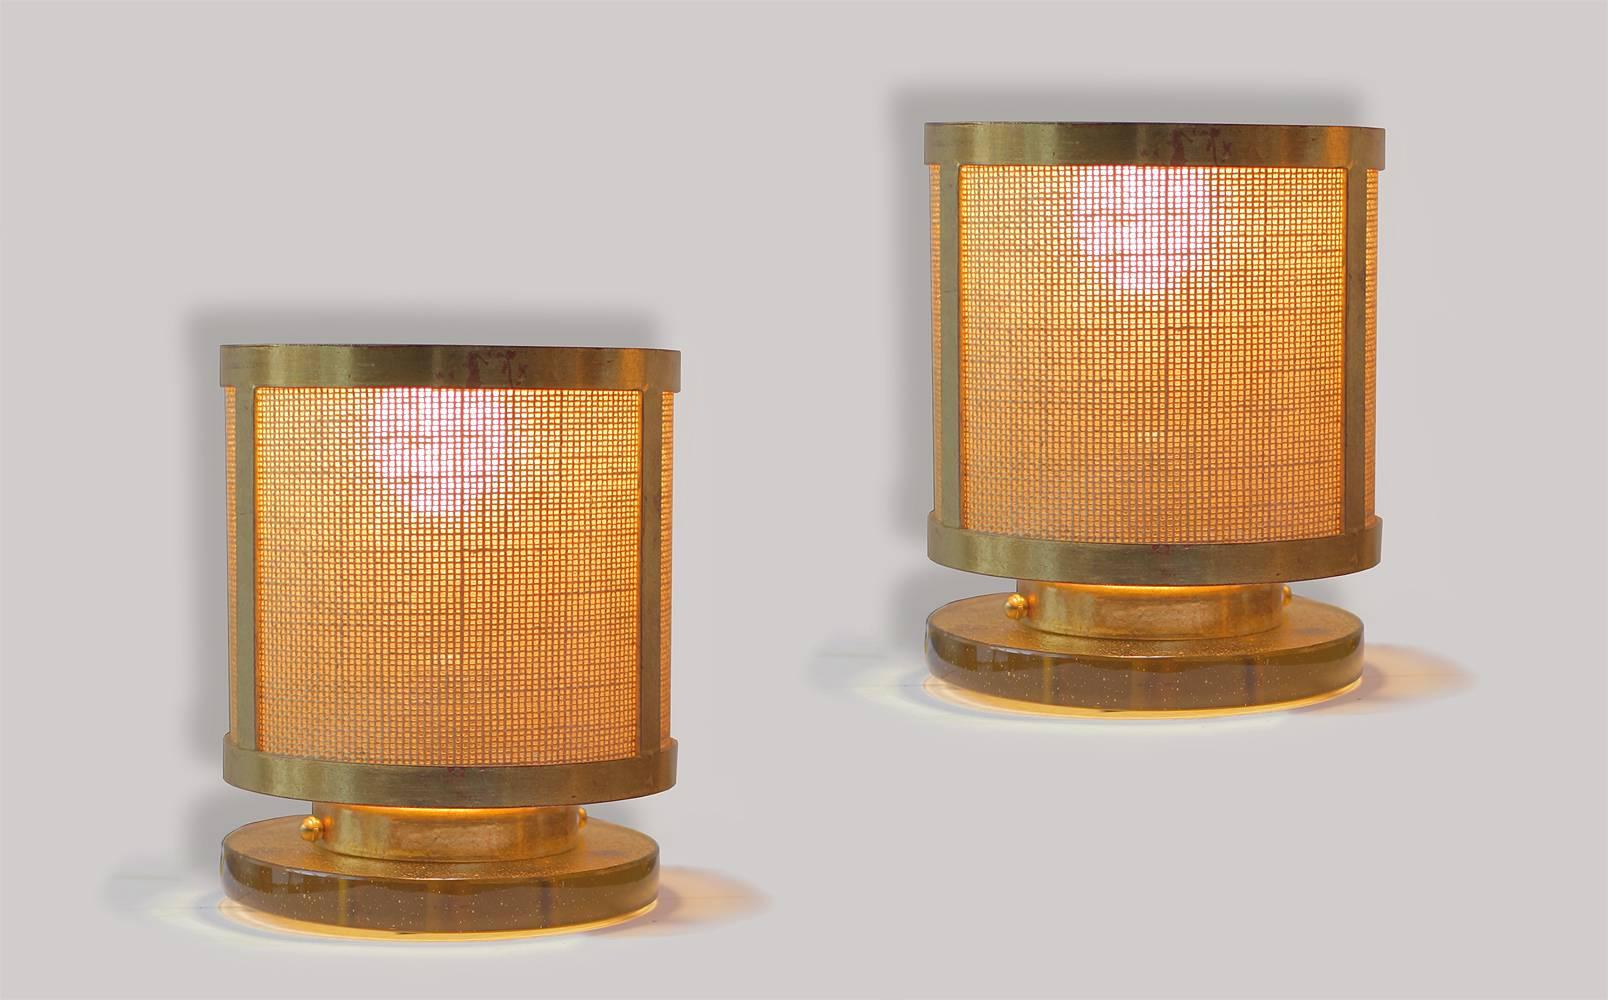 Pair of gilt brass table lamps from a Parisian restaurant, comes from a set of 12.
This pair is the last pair available.
23-karat gold leaf gilding over brass. The shades are in jute burlap, in original condition. Bases are made of amazing yellow